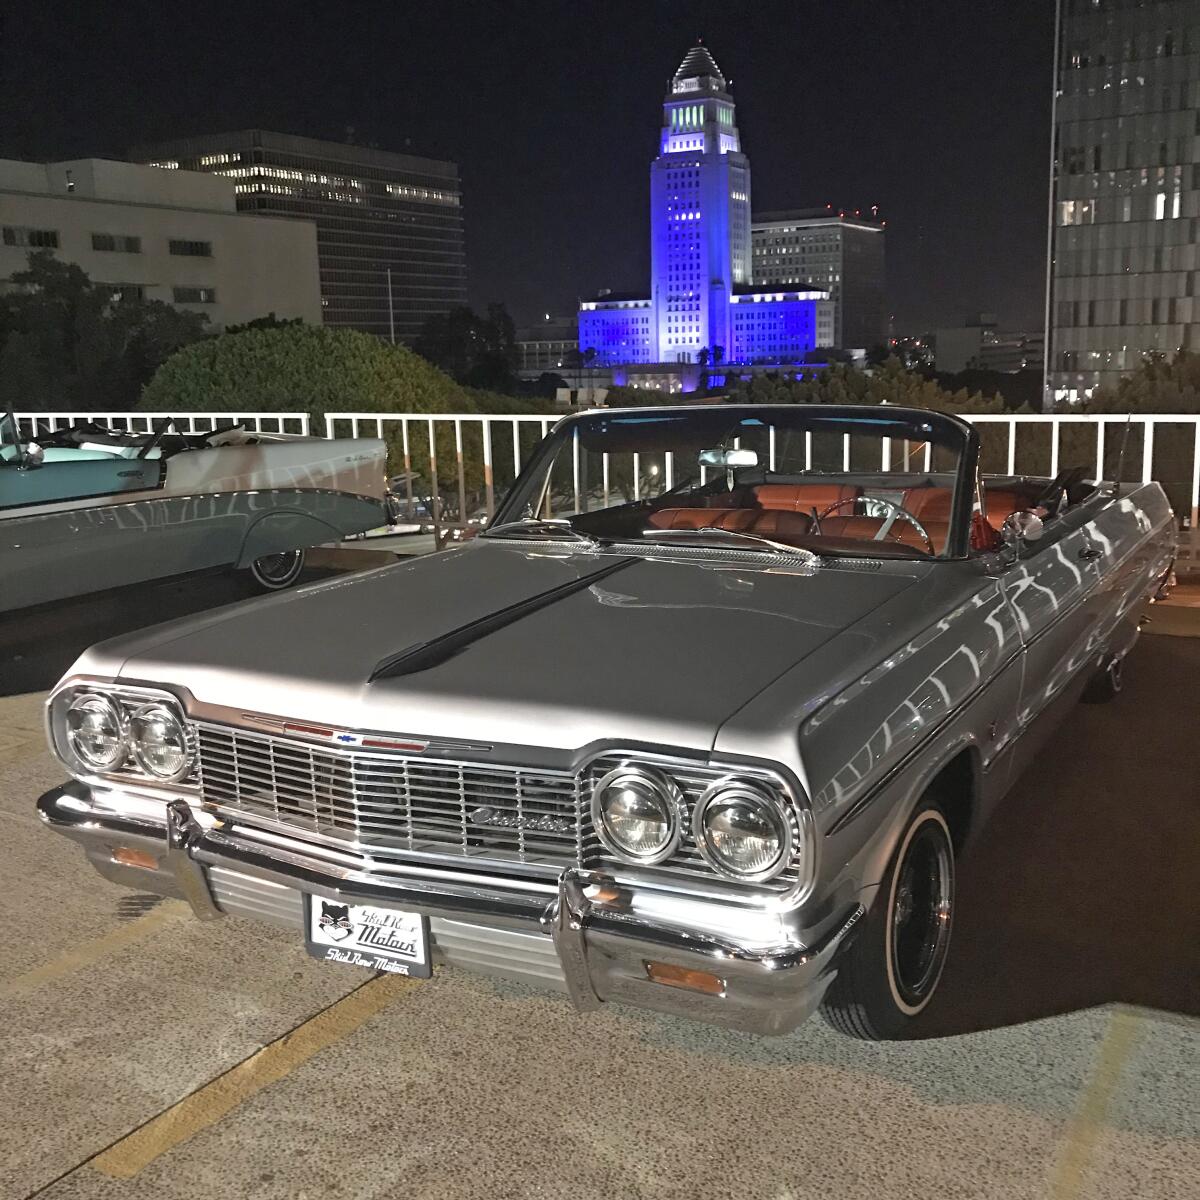 A 1964 Impala  with the Los Angeles skyline in the background